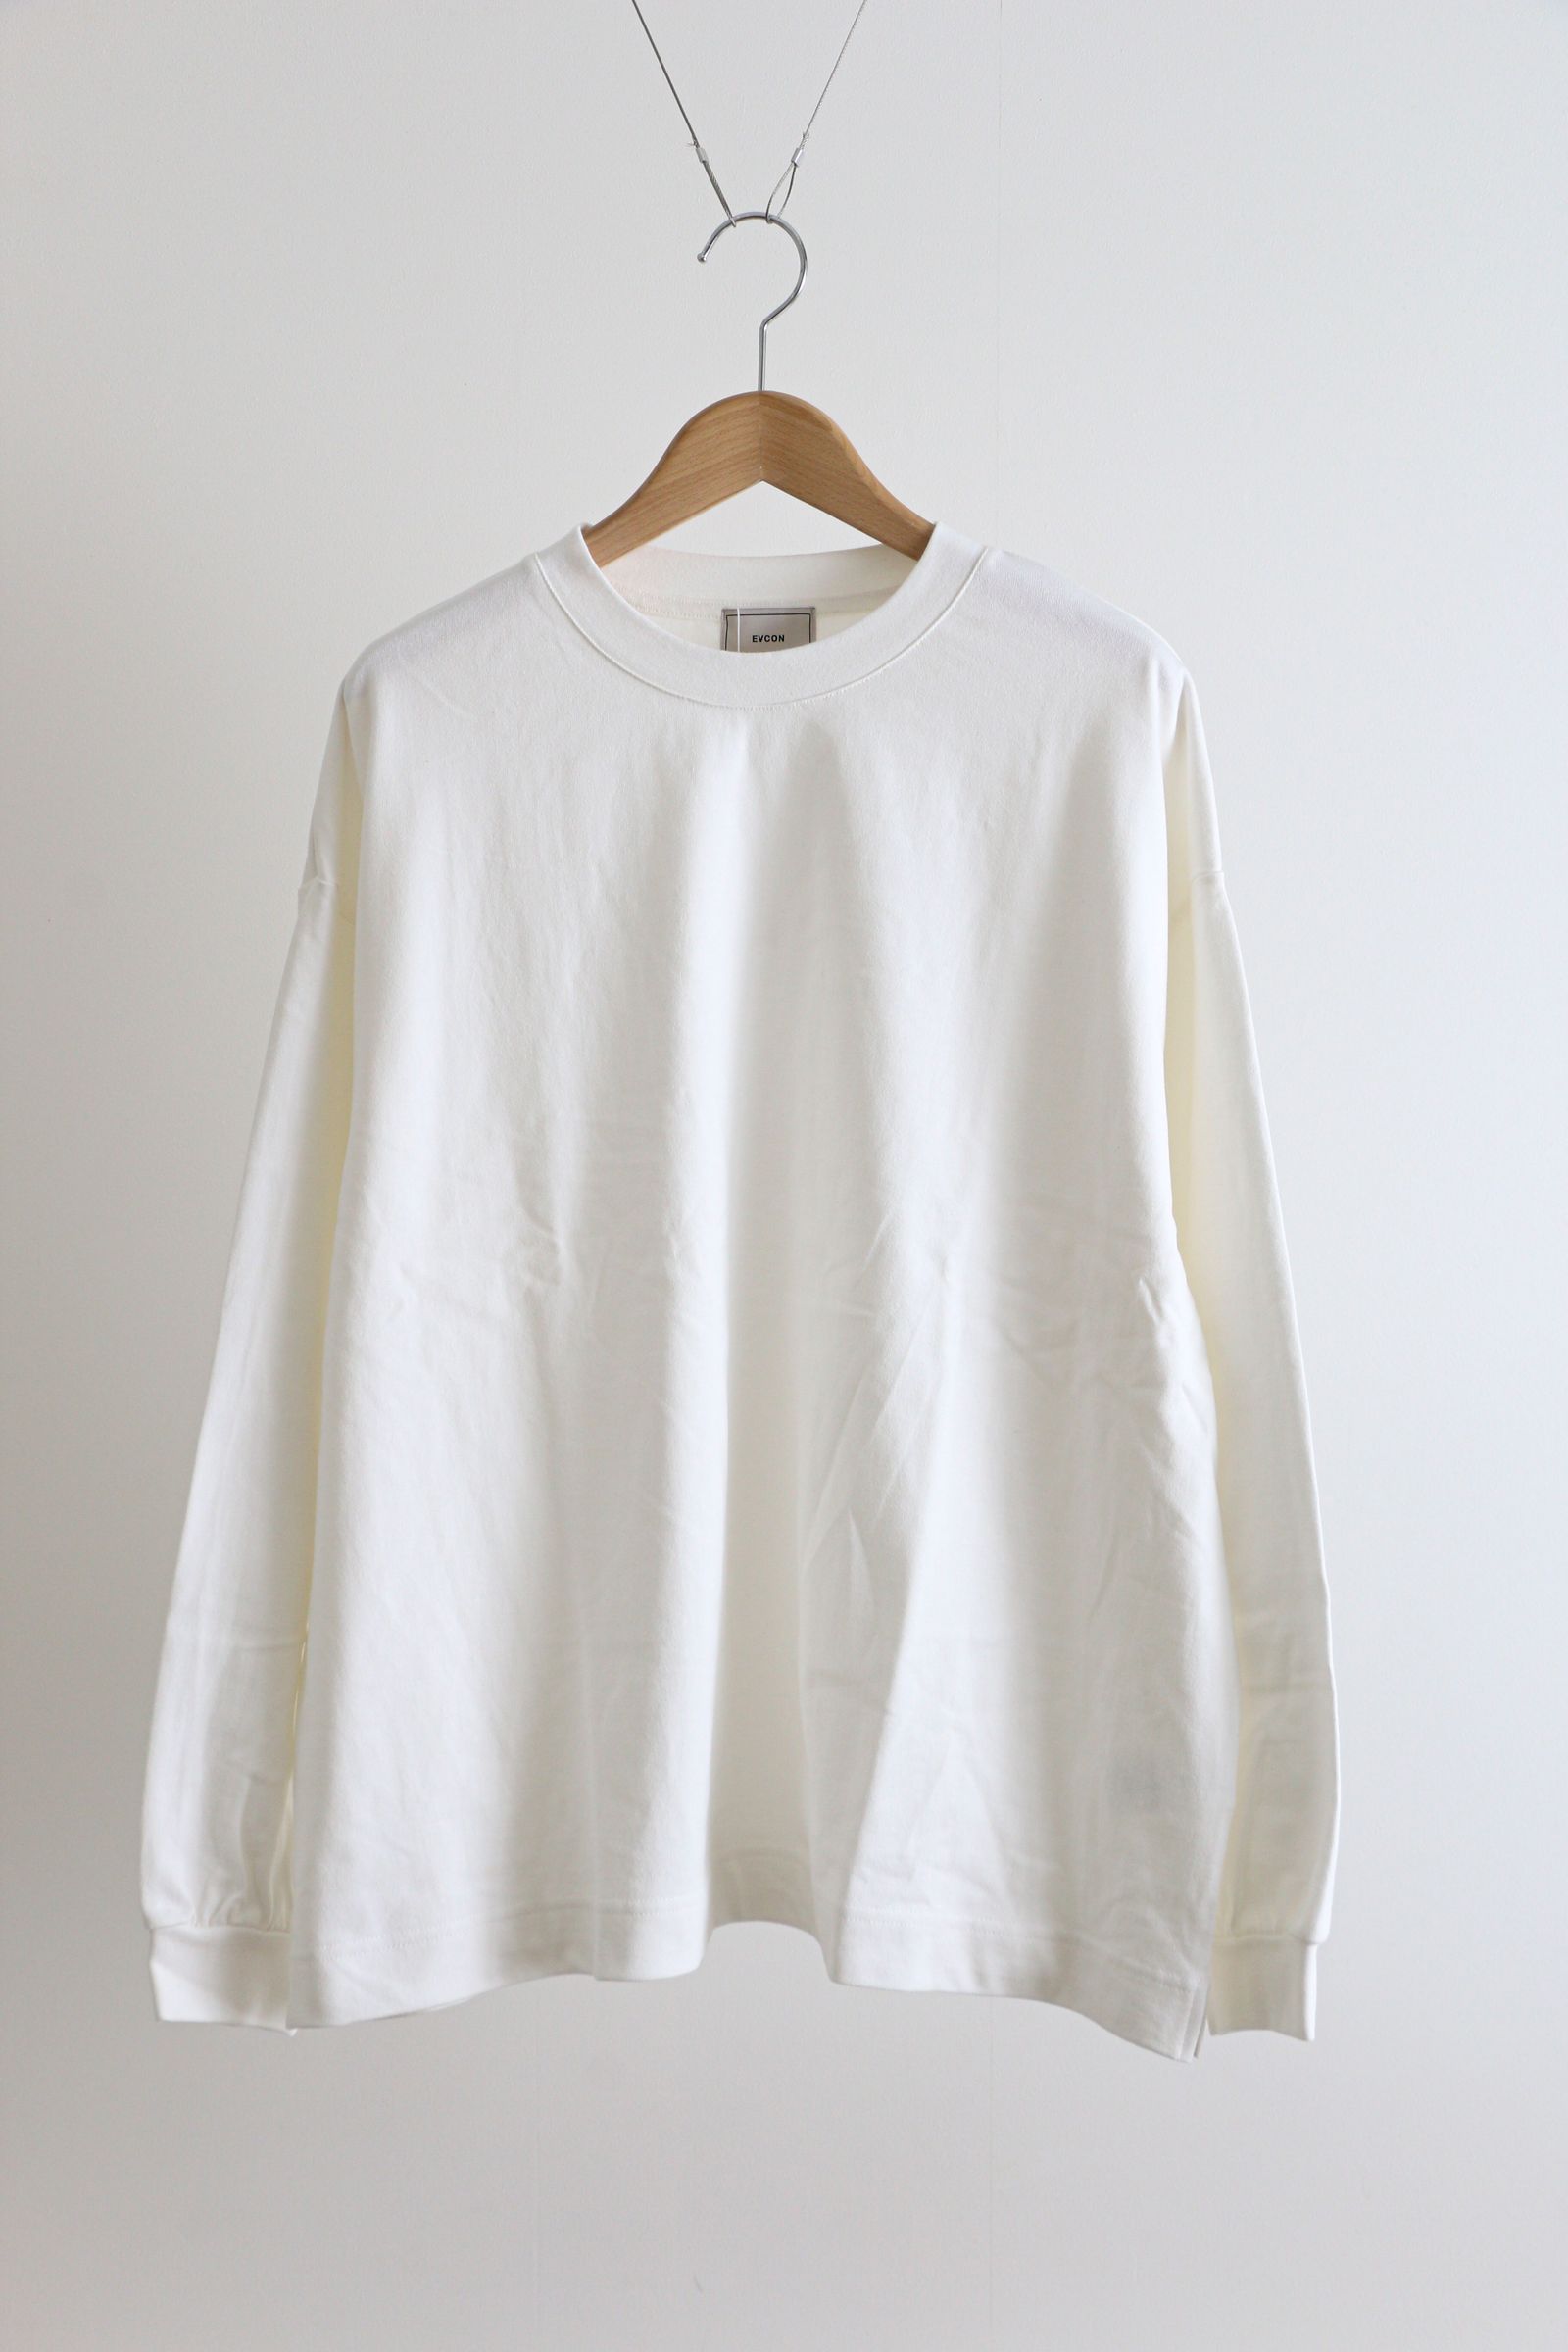 EVCON - WIDE L/S T-SHIRT WHITE / ワイドシルエット / ロング 